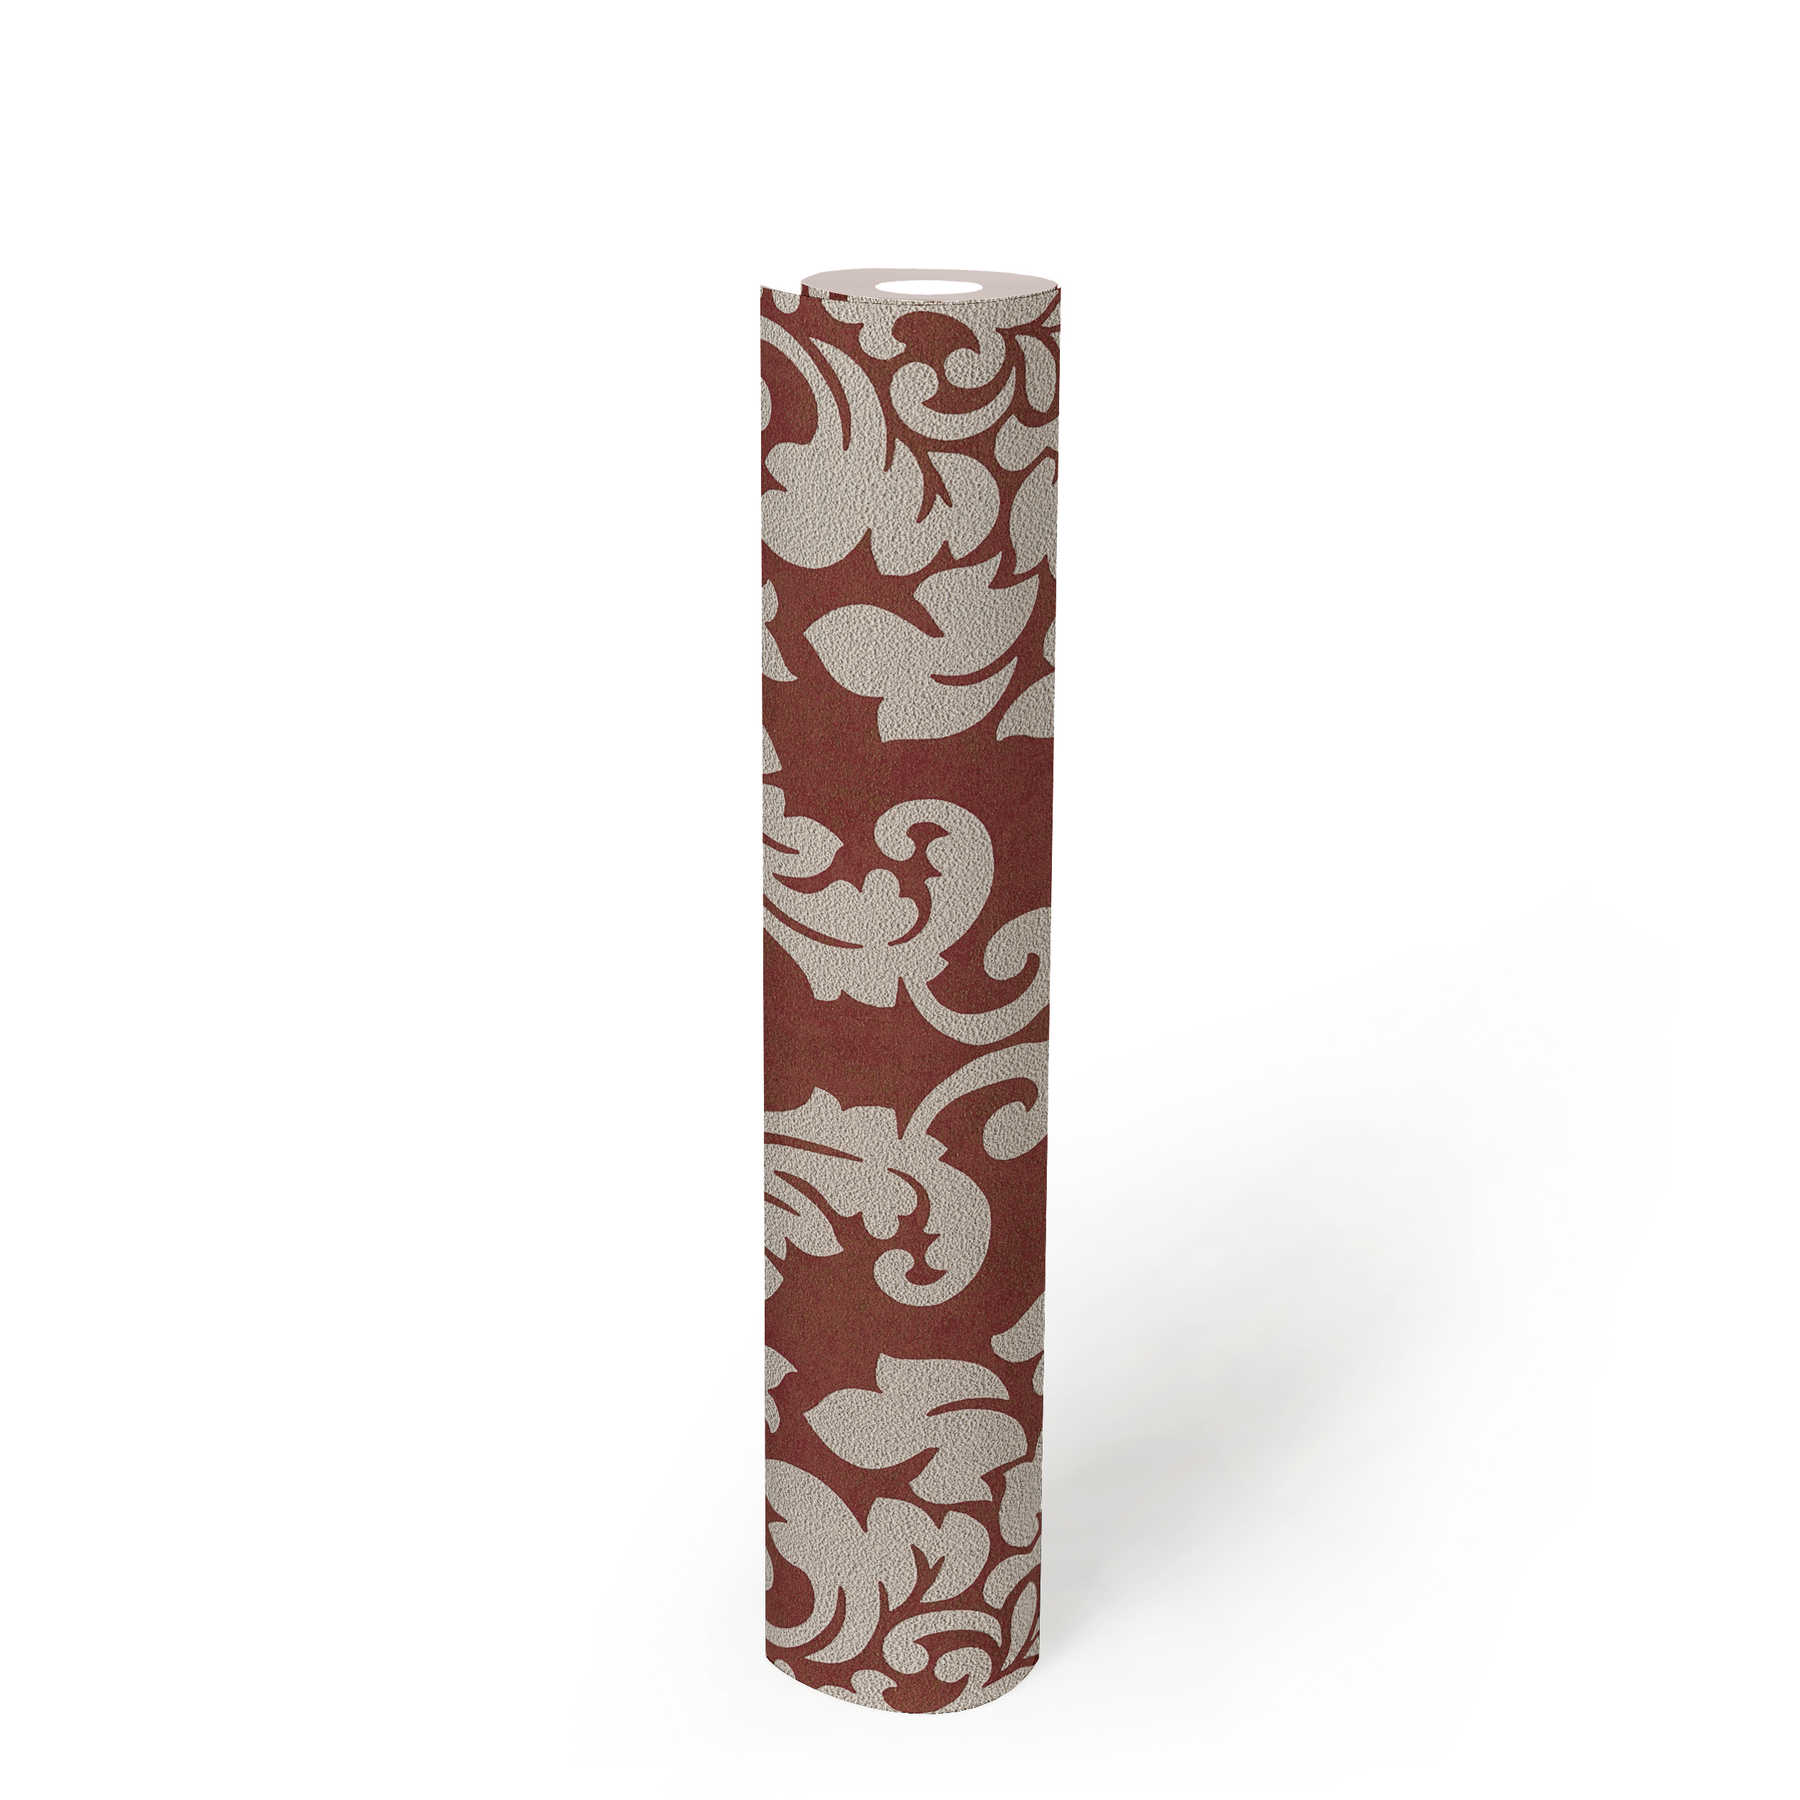             Floral ornamental wallpaper with metallic effect - red, gold, beige
        